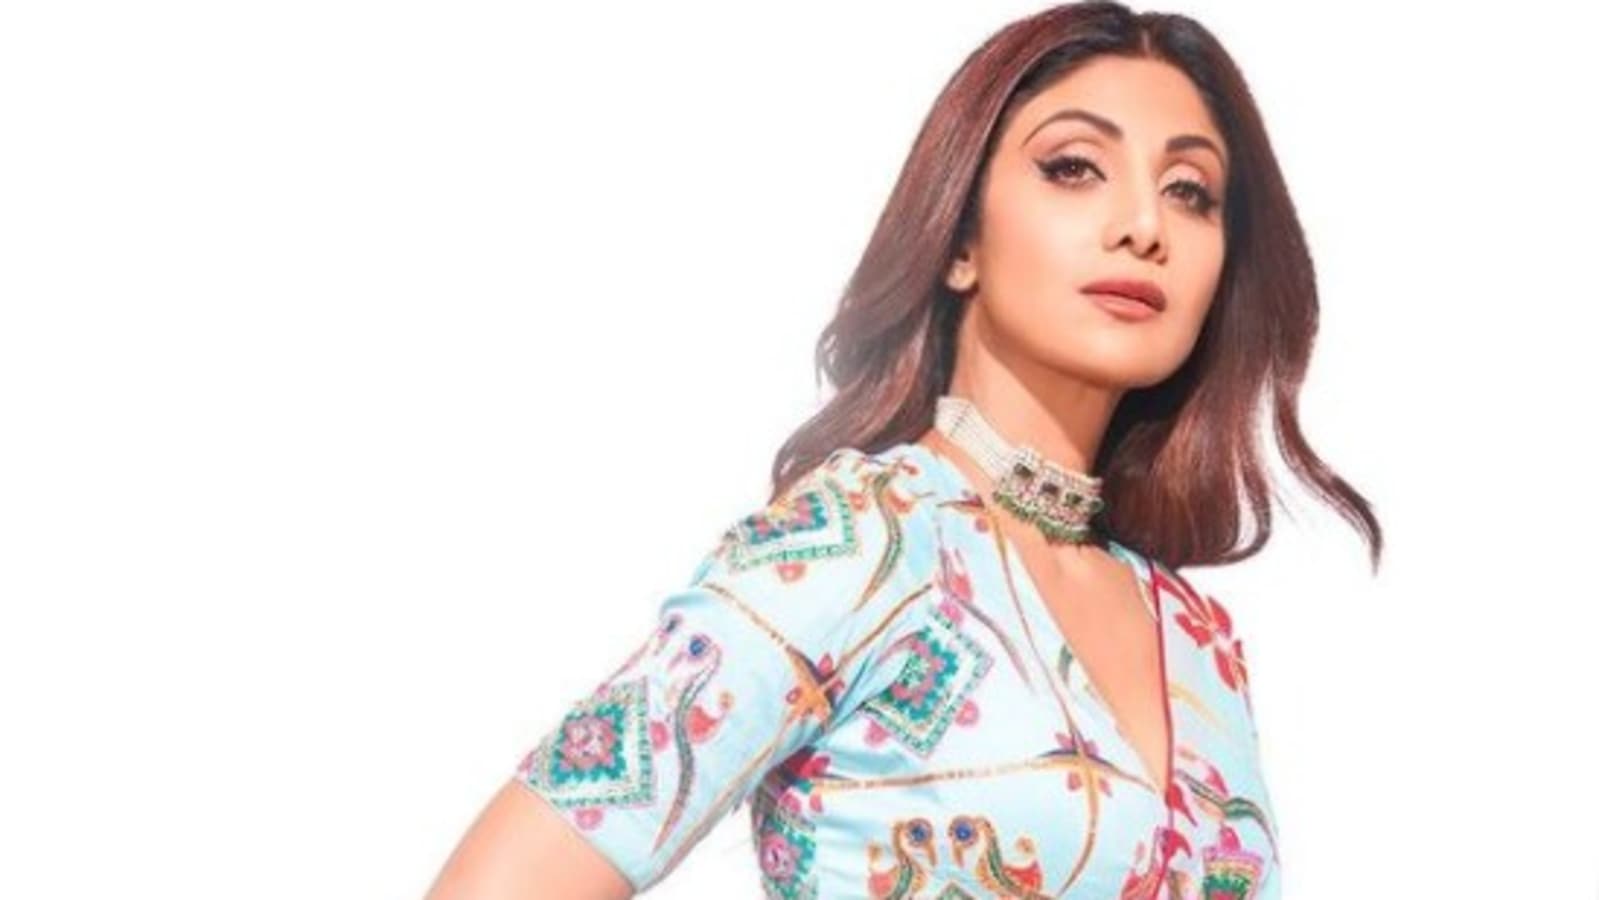 Shilpa Shetty Sexy Nangi Nangi - Shilpa Shetty shares pics from first photoshoot after Raj Kundra's arrest,  is 'determined to rise'. See here | Bollywood - Hindustan Times